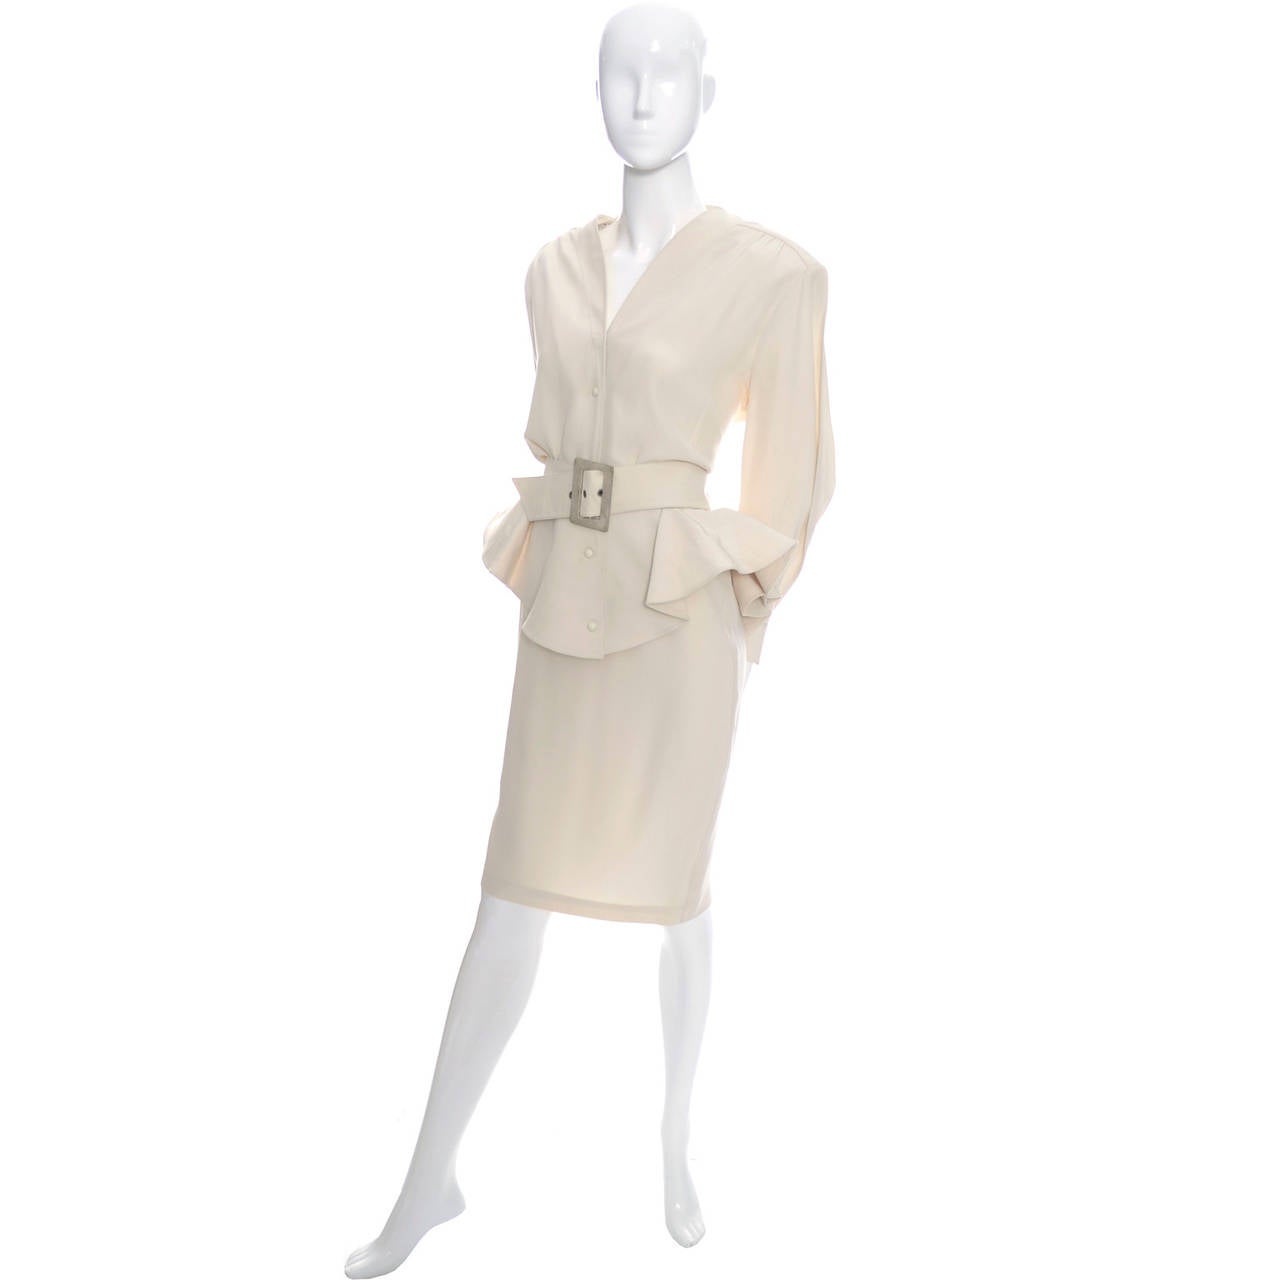 This 1980's vintage 2 piece skirt suit was designed by the French designer,  Thierry Mugler who is known for his structured design aesthetic.  His clothing always has defined shapes and his uses unique design elements like the peplum on the 80's